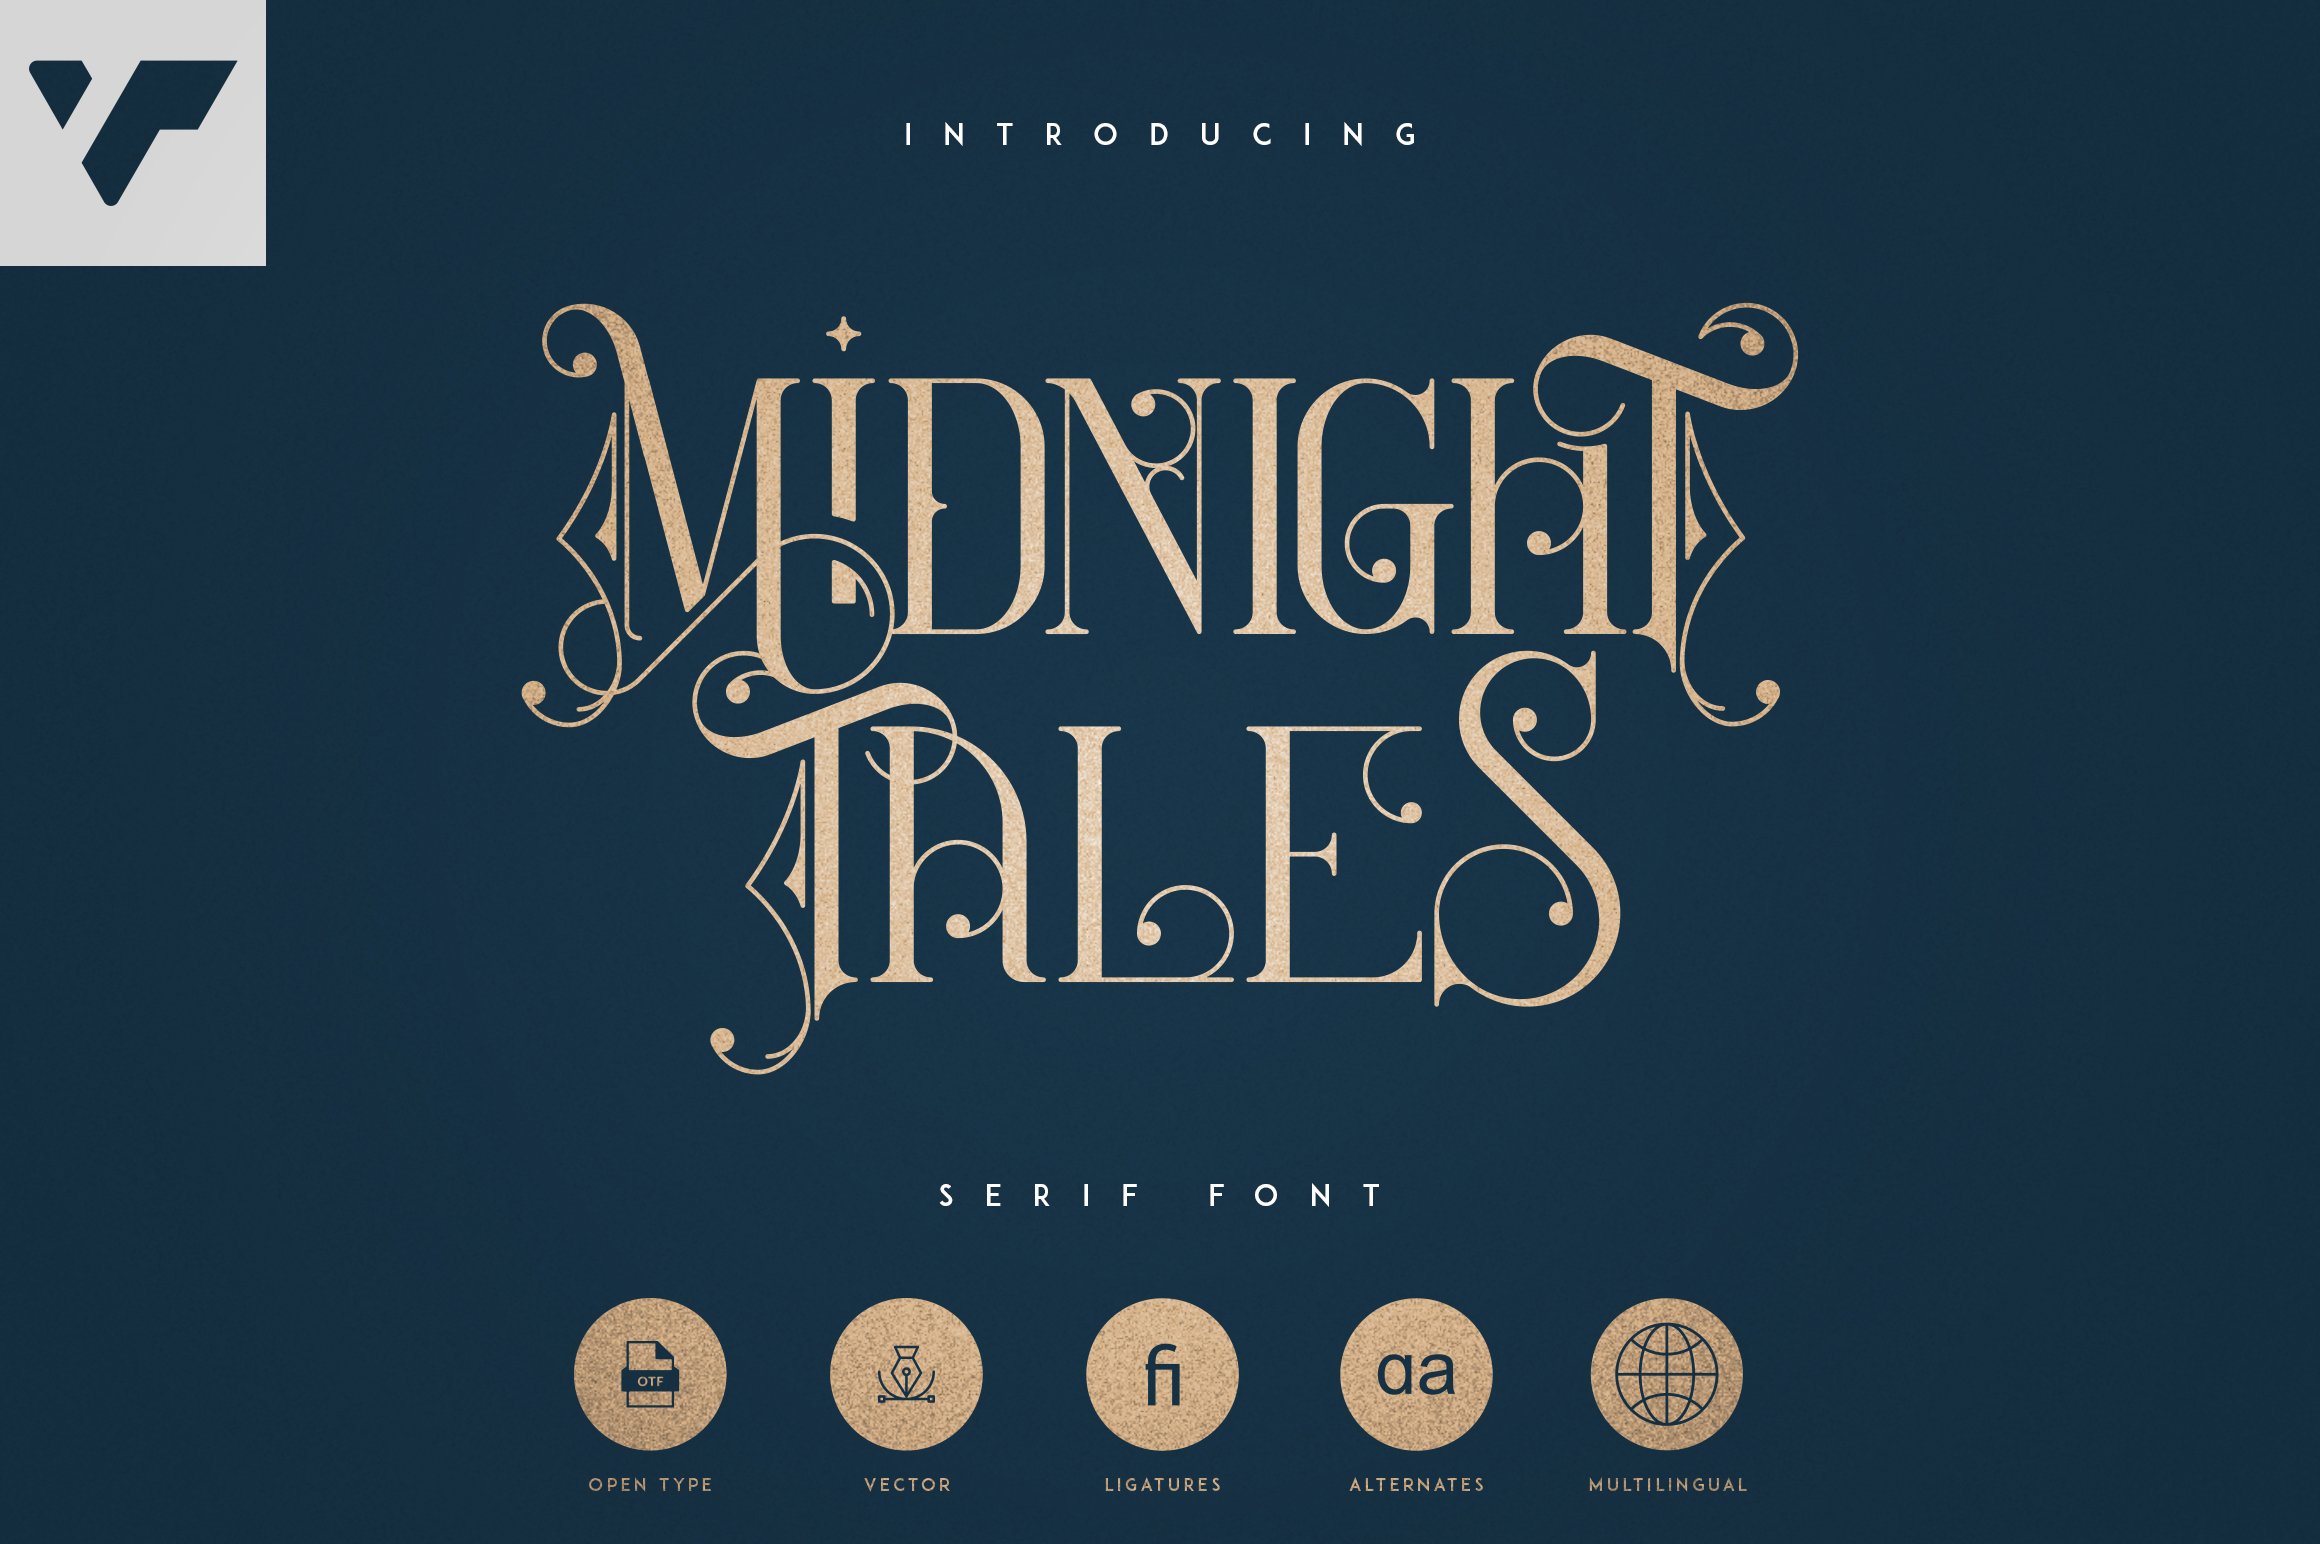 SALE! Midnight Tales - Vintage font cover image.